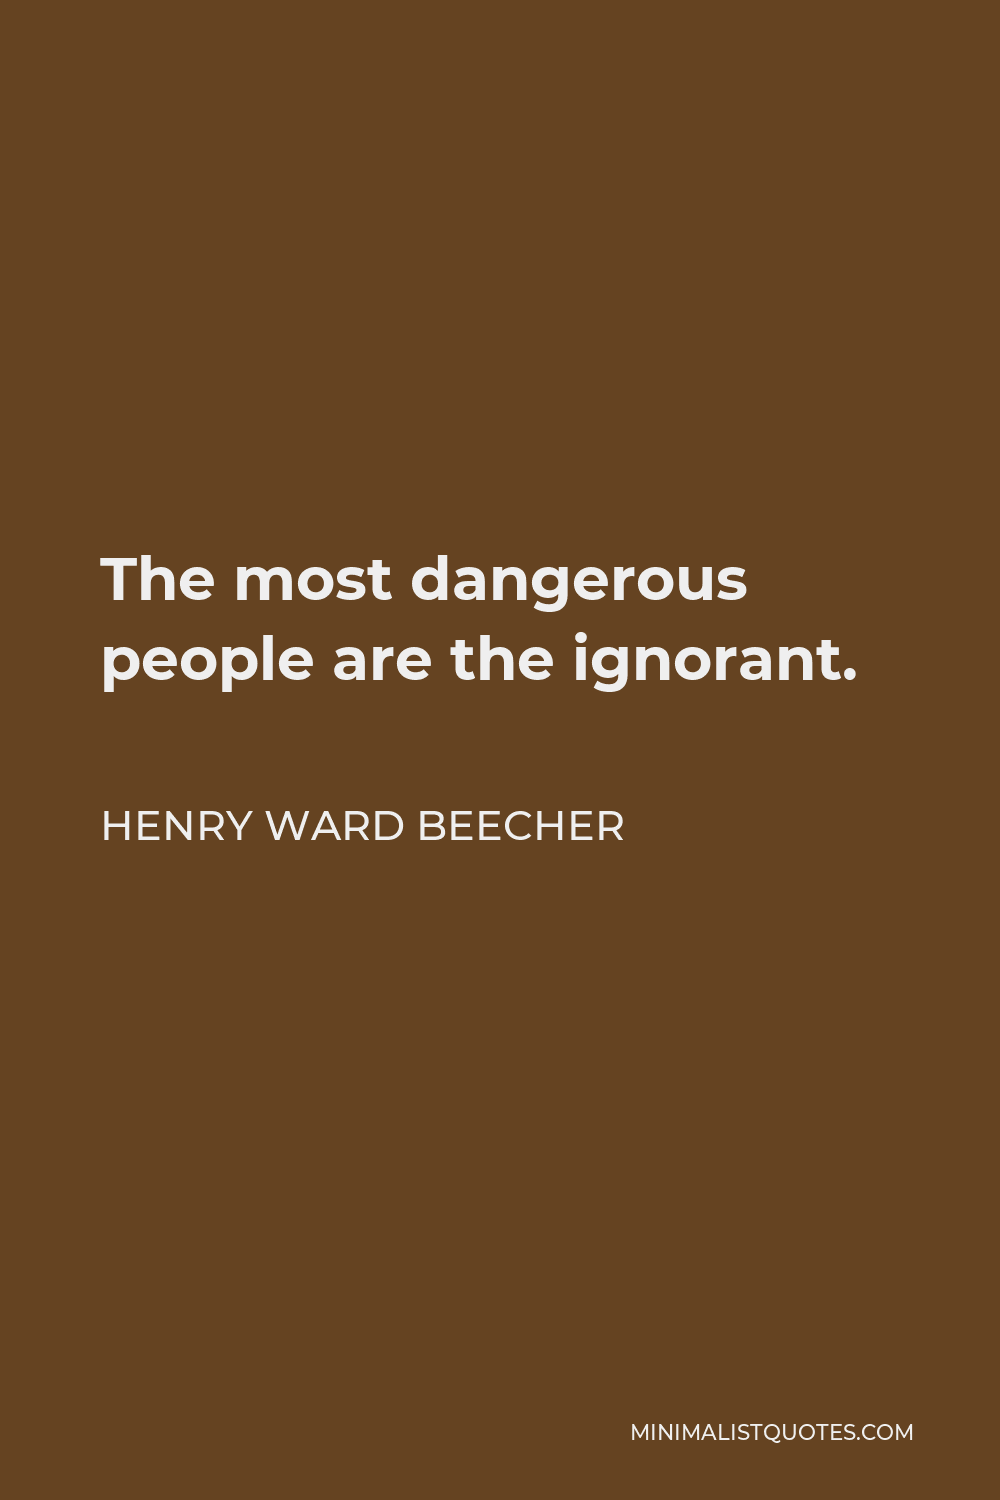 Henry Ward Beecher Quote - The most dangerous people are the ignorant.